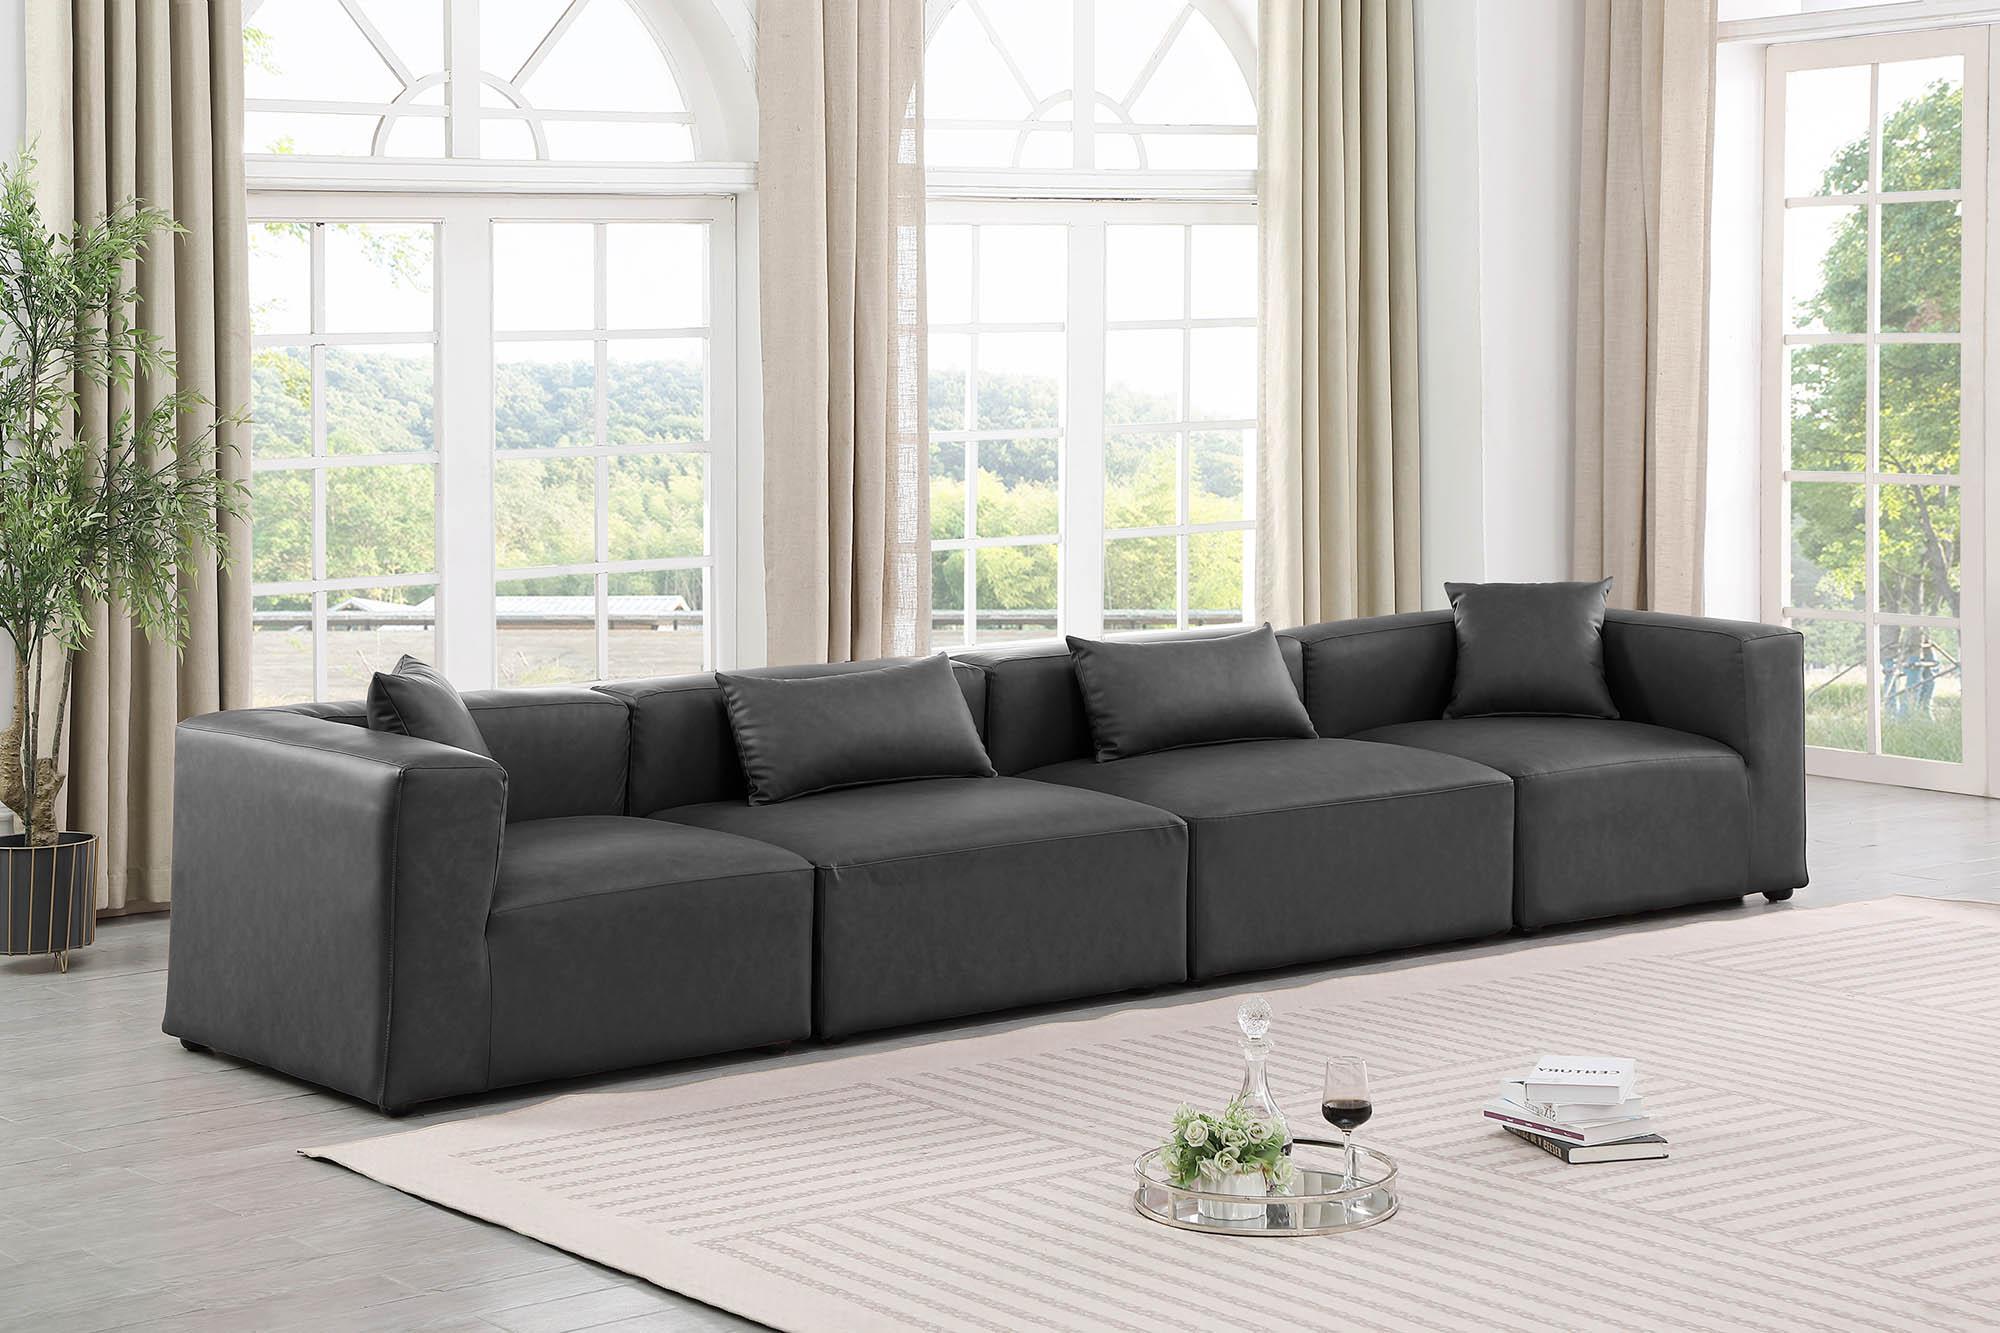 

    
Charcoal Grey Faux Leather Modular Sofa CUBE 668Grey-S144B Meridian Contemporary
